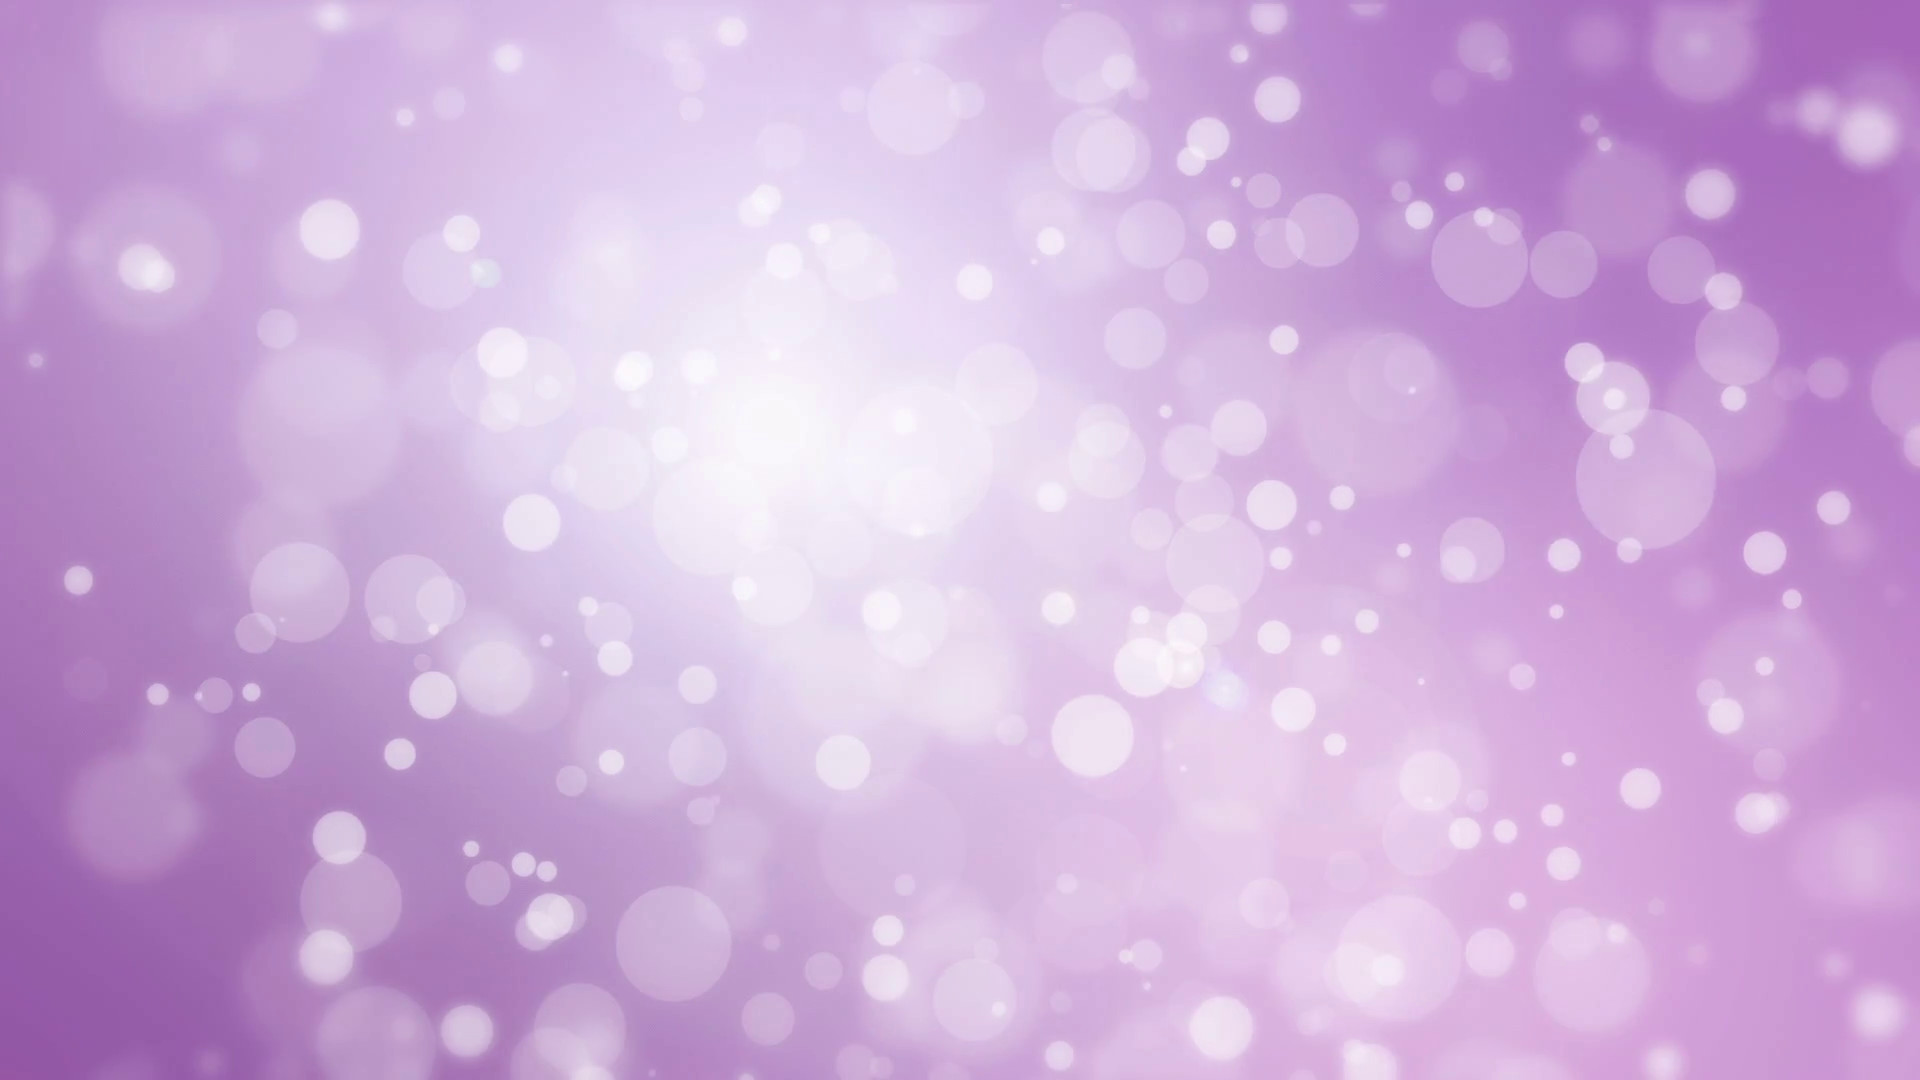 1920x1080 Beautiful festive soft purple background with moving light particles  creating a bokeh effect Motion Background - VideoBlocks